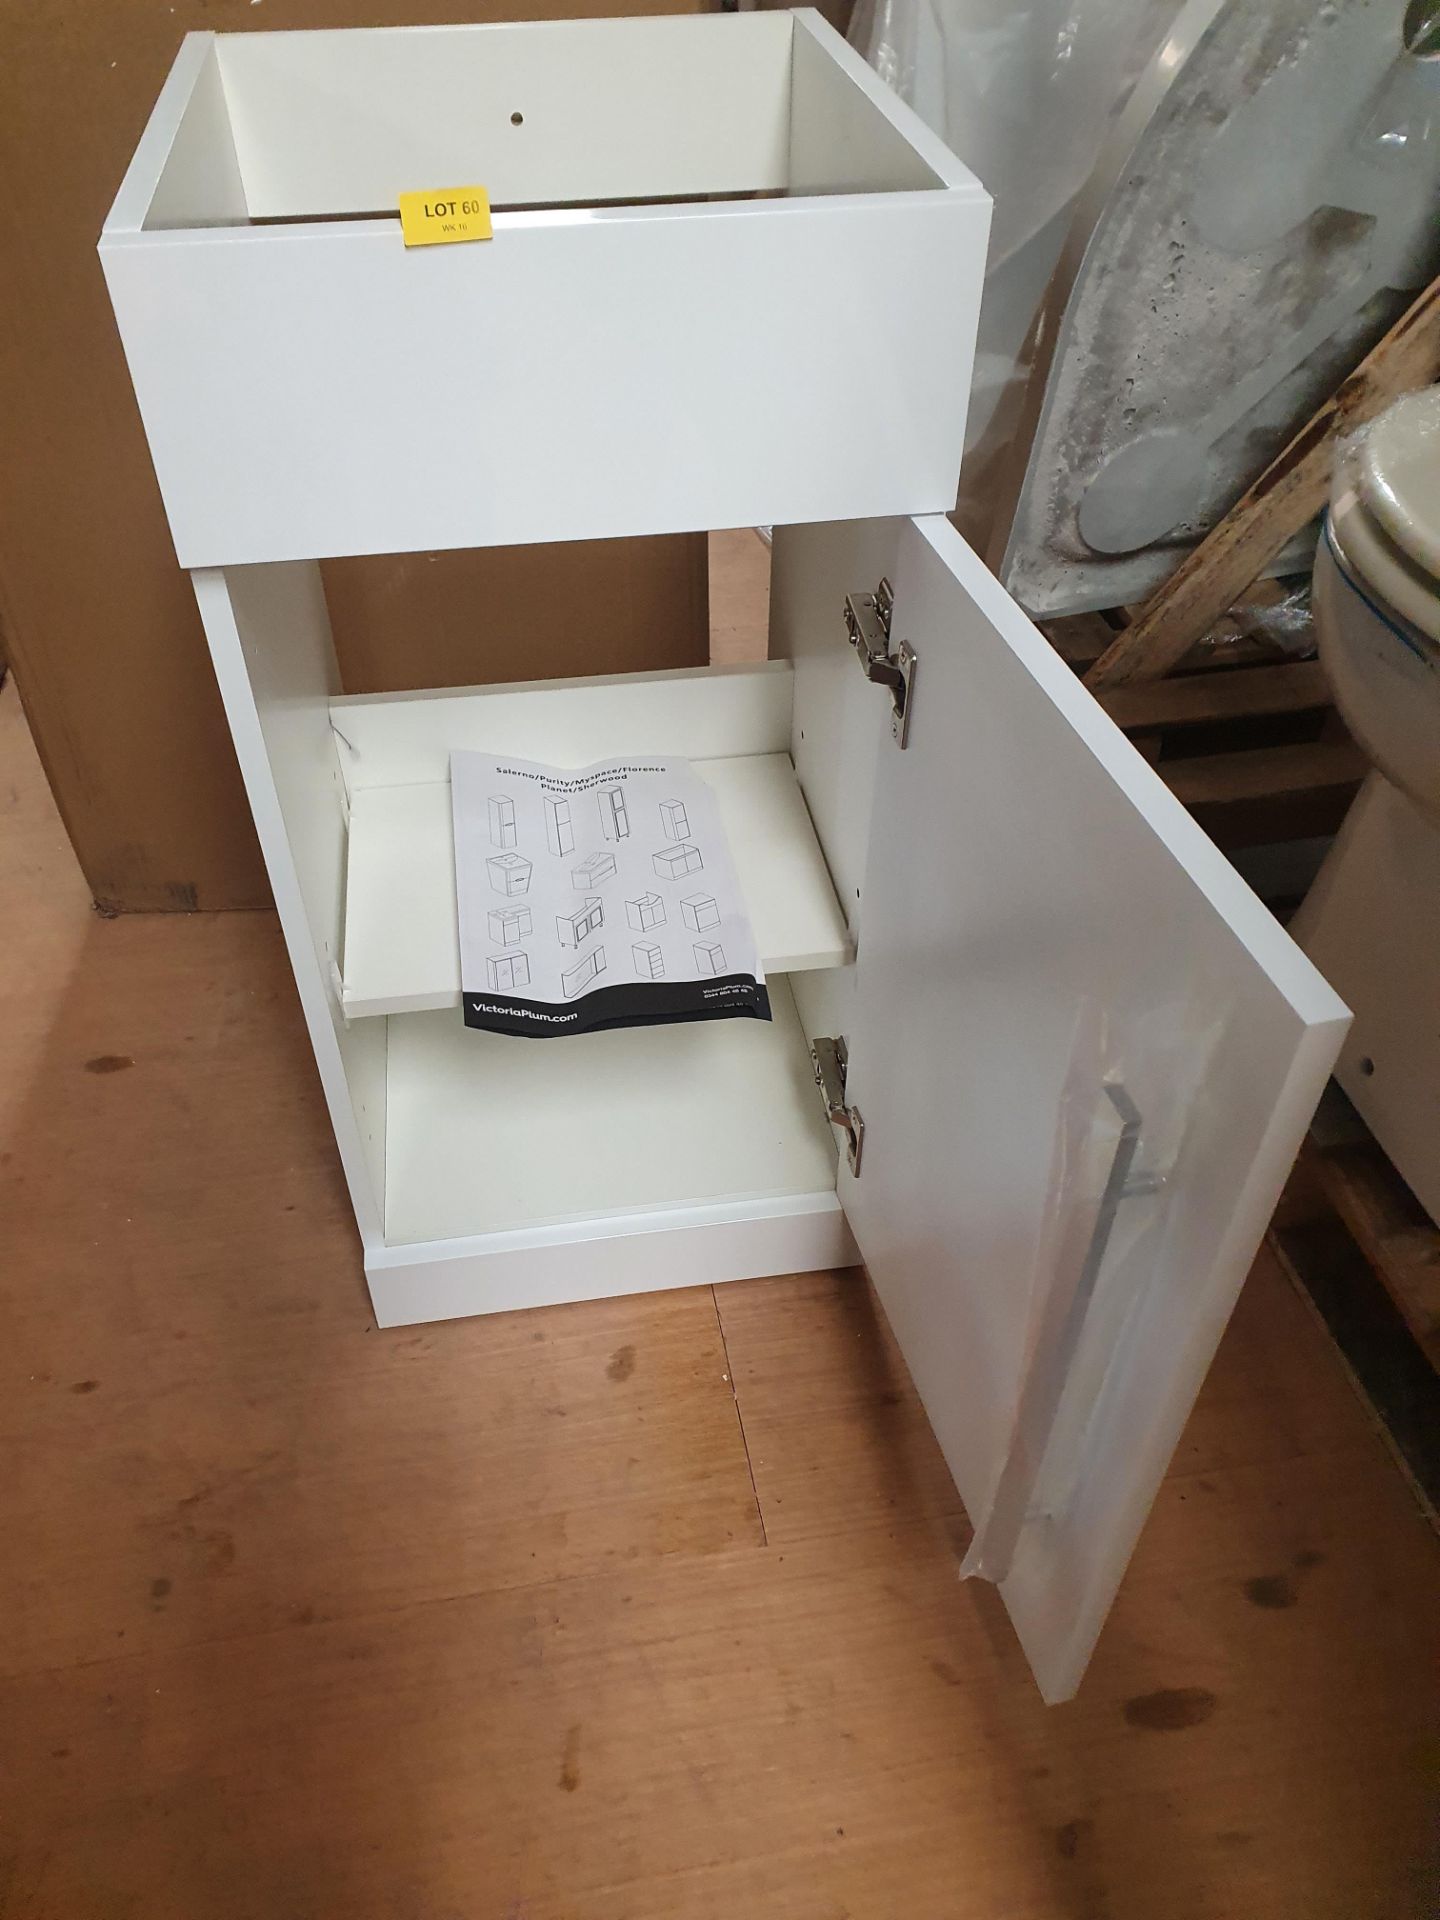 390 x 400mm Gloss White Vanity Storage Unit With Chrome Shaker Handle. Appears New Unused. - Image 2 of 2